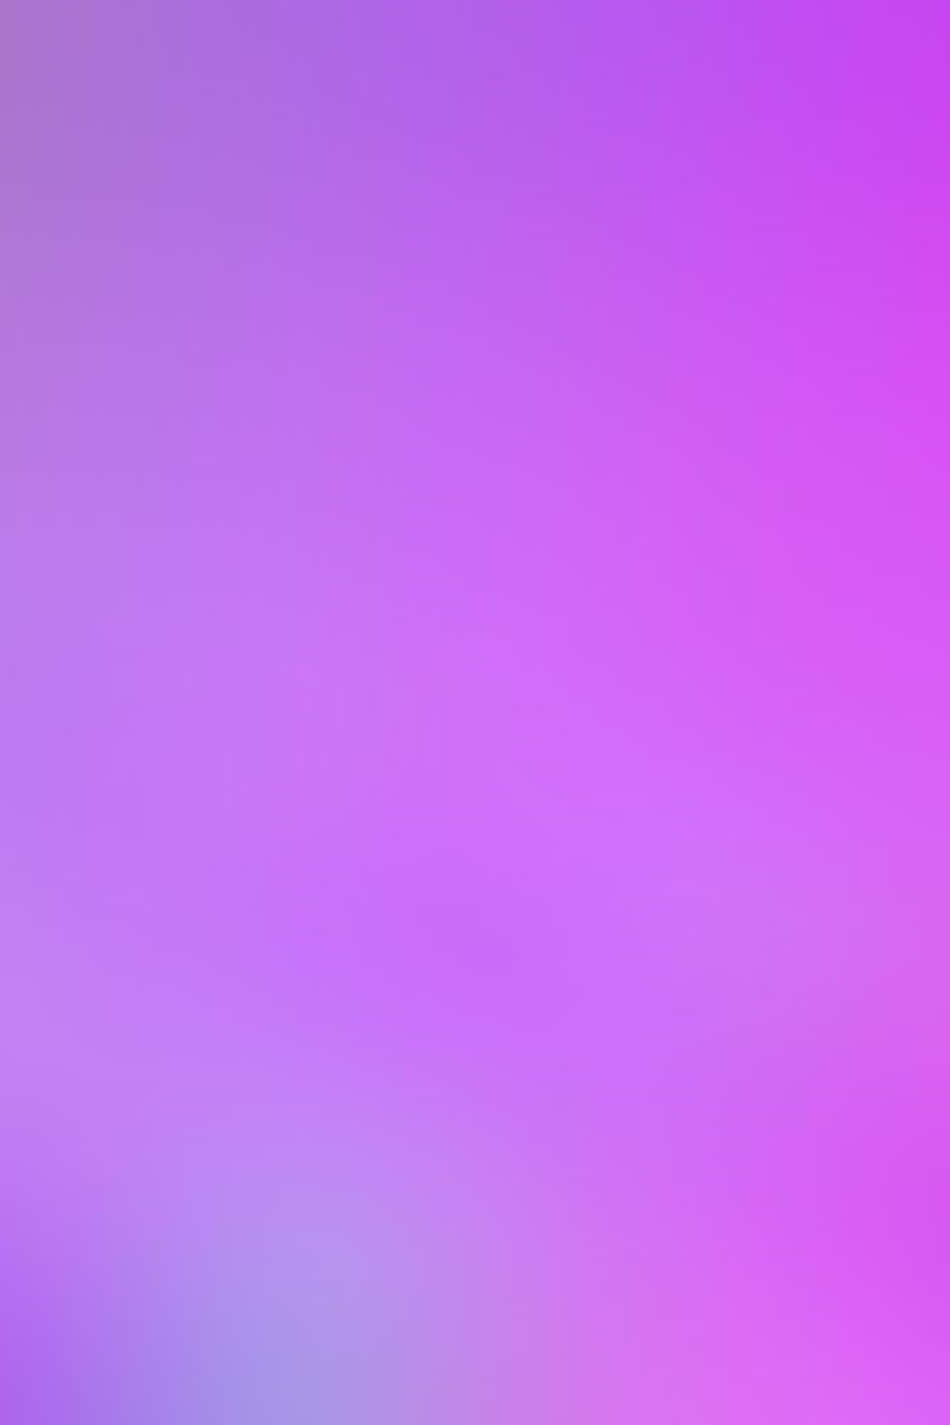 A Purple And Blue Blurred Background Wallpaper